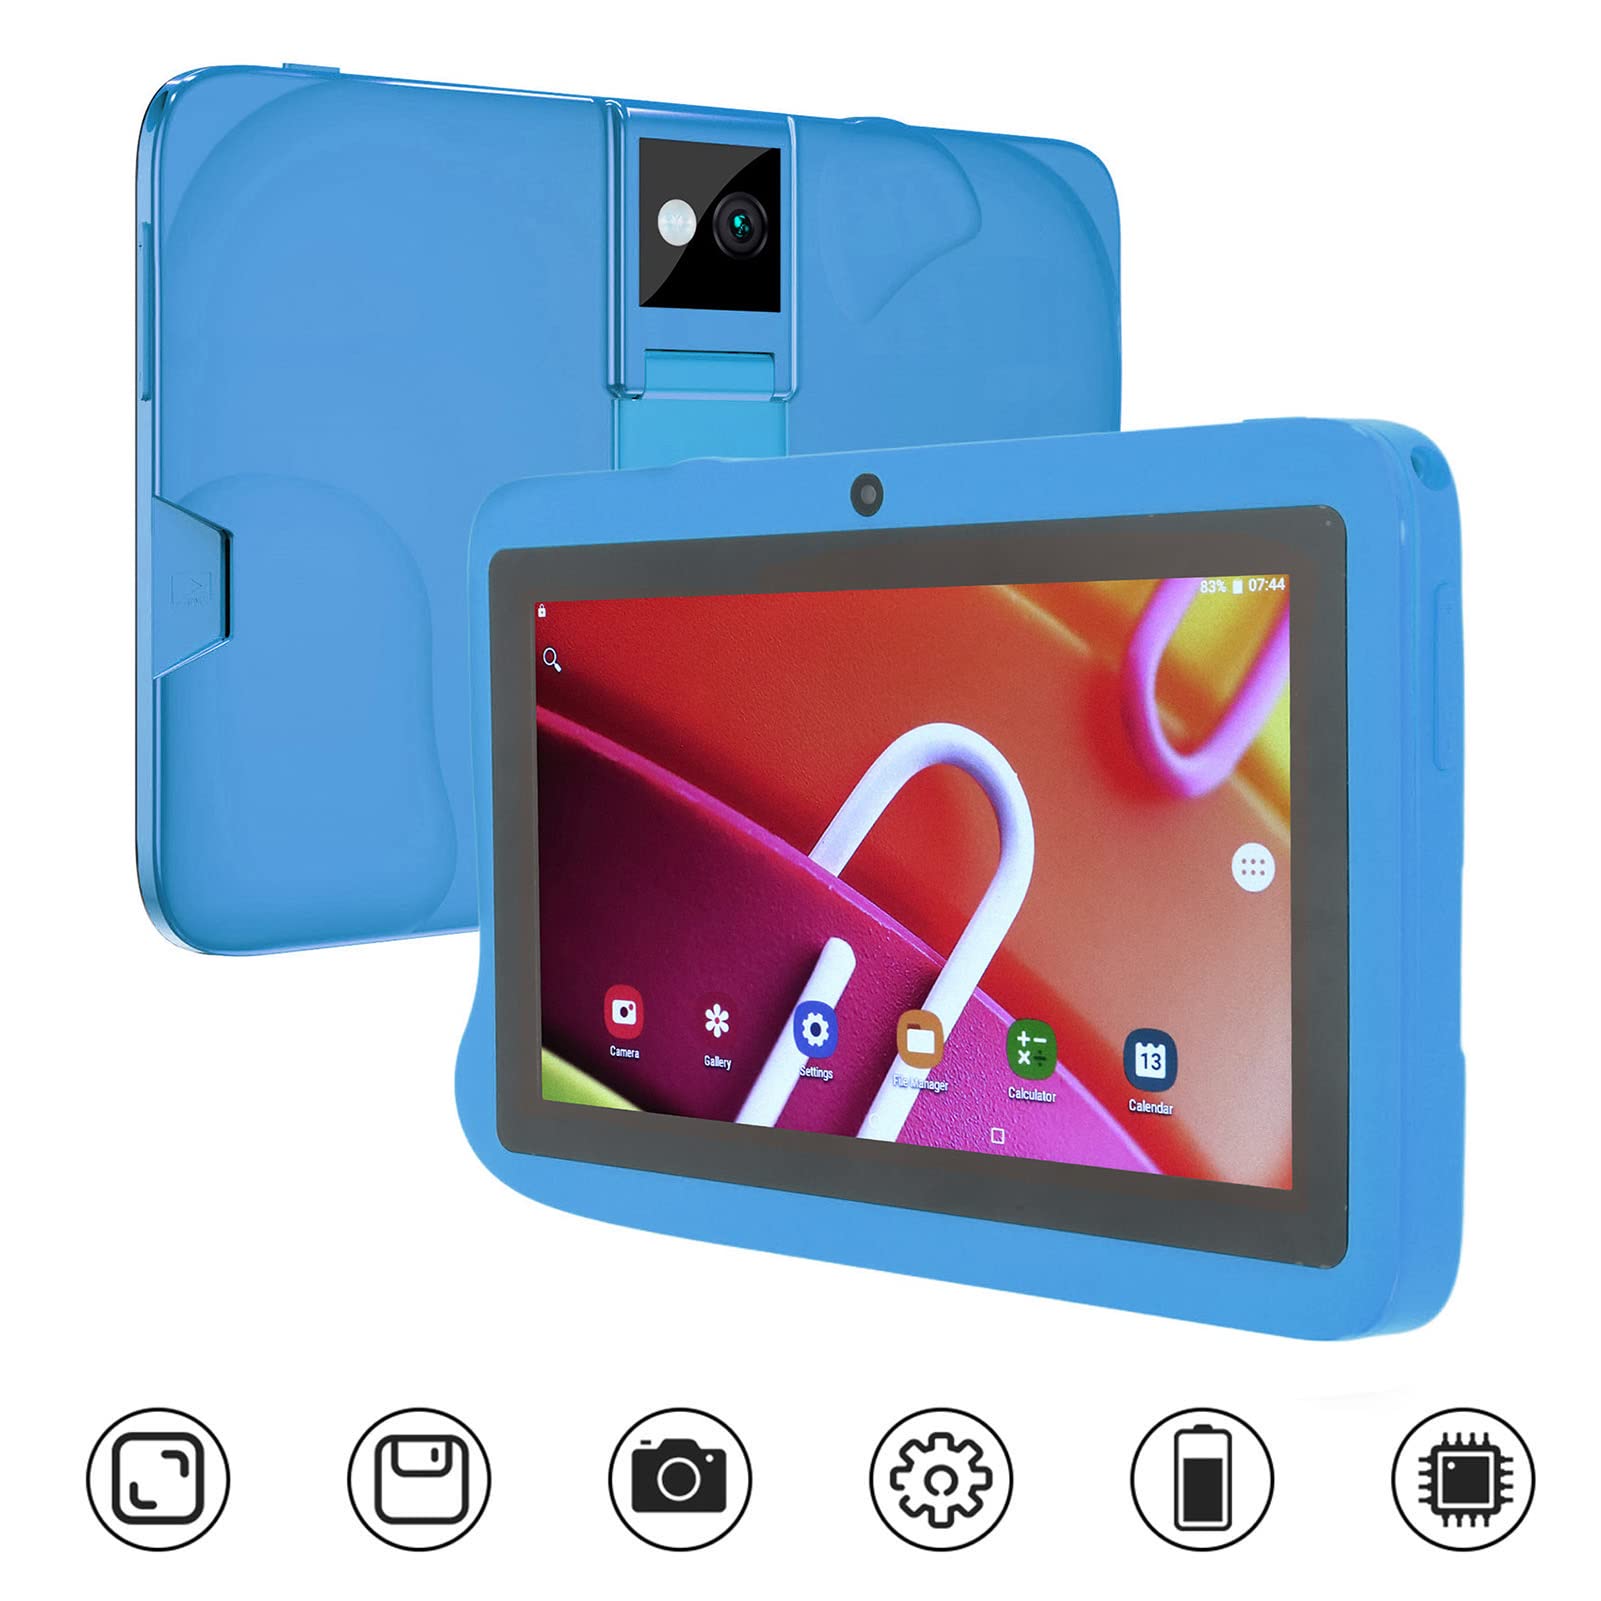 WEYI 7 Inch Tablet, 4GB RAM 128GB ROM HD IPS Screen Octa Core CPU 6000mAh Blue Reading Tablet for Game (Blue)